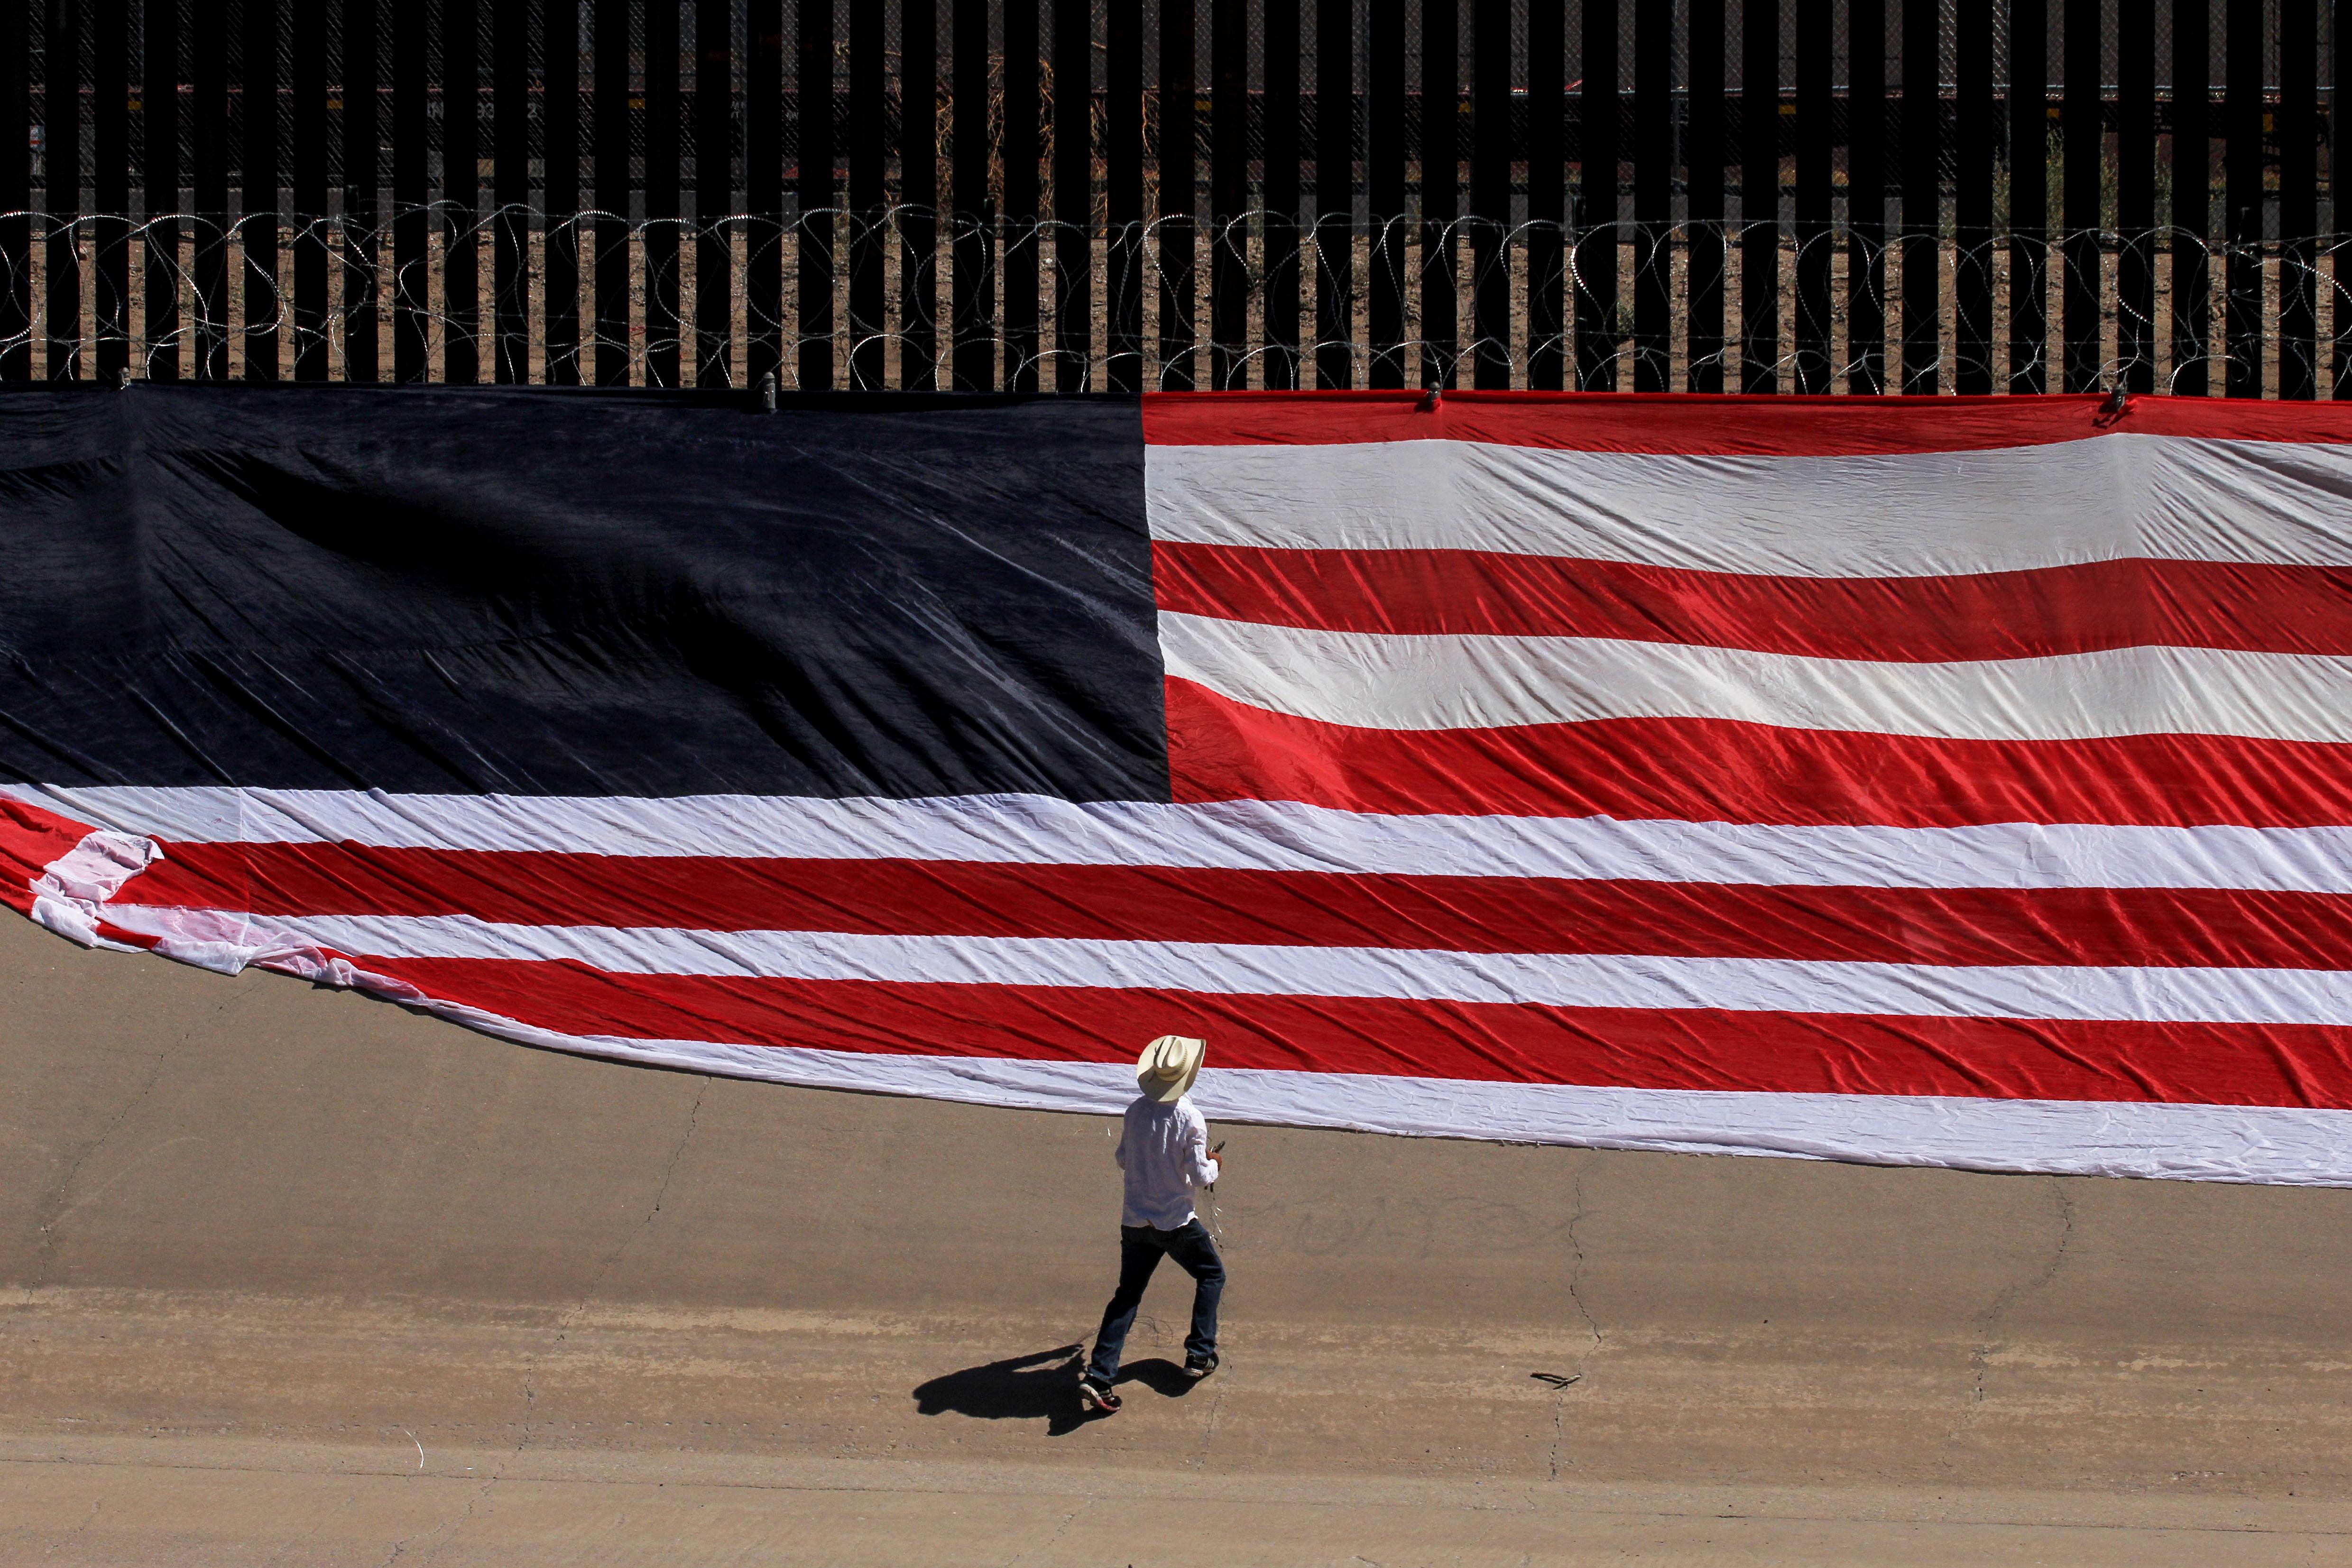 Mexican US resident Roberto Márquez, places a United States national flag on the border wall next to Rio Grande river to demonstrate against the immigration policies of Donald Trump in the border between El Paso and Ciudad Juarez, Mexico, on June 6, 2019.